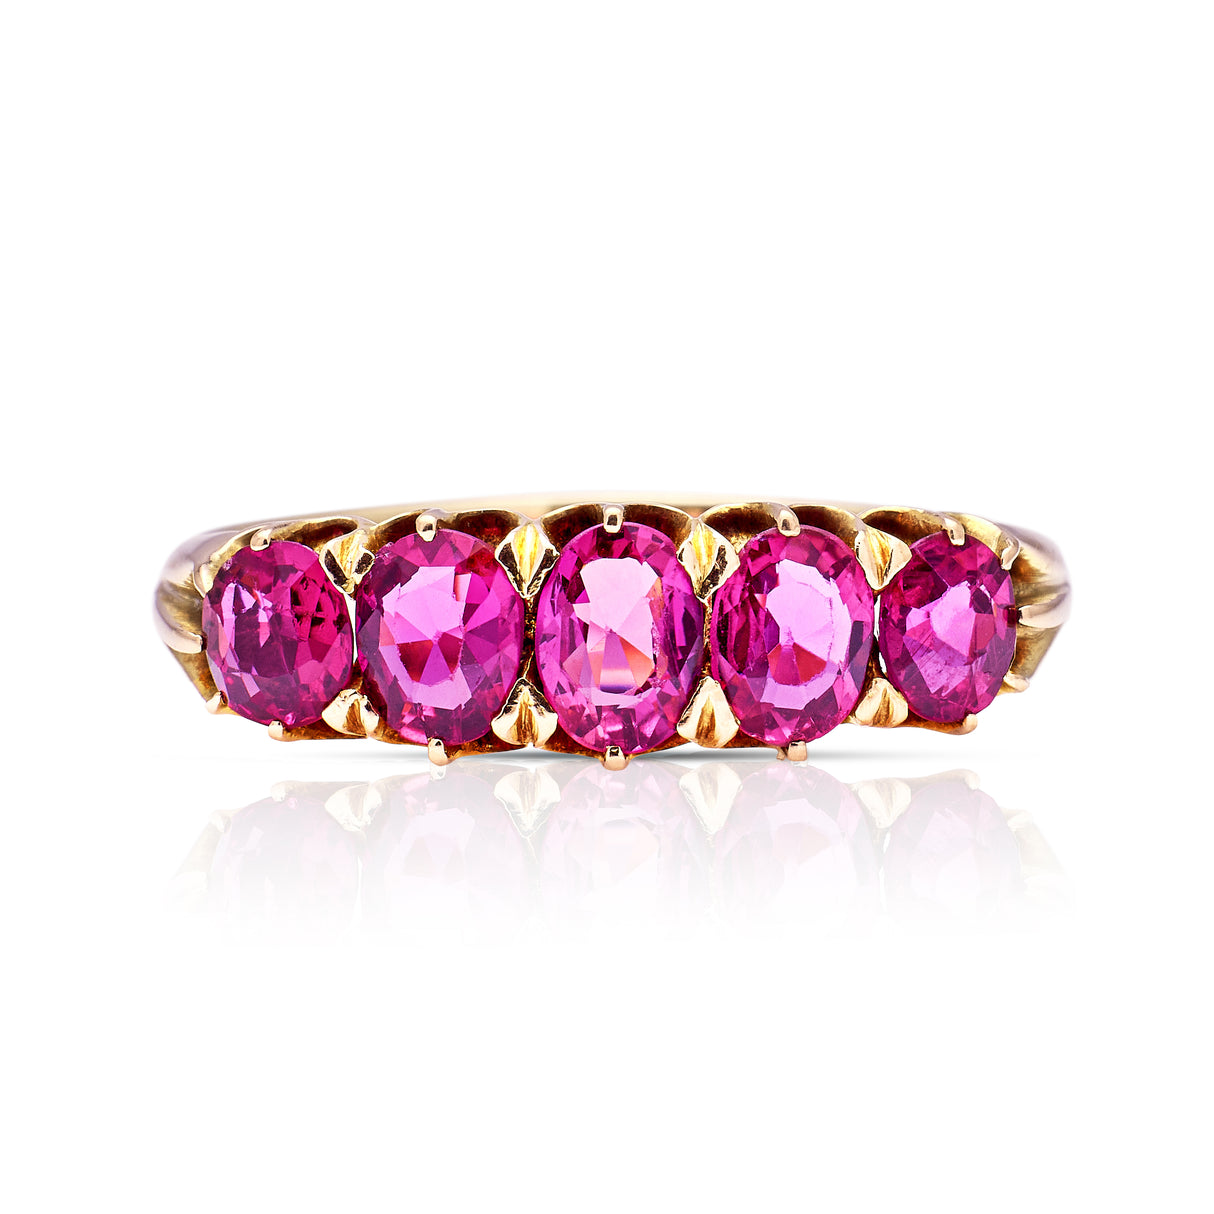 Antique, Edwardian five-stone ruby ring, yellow gold